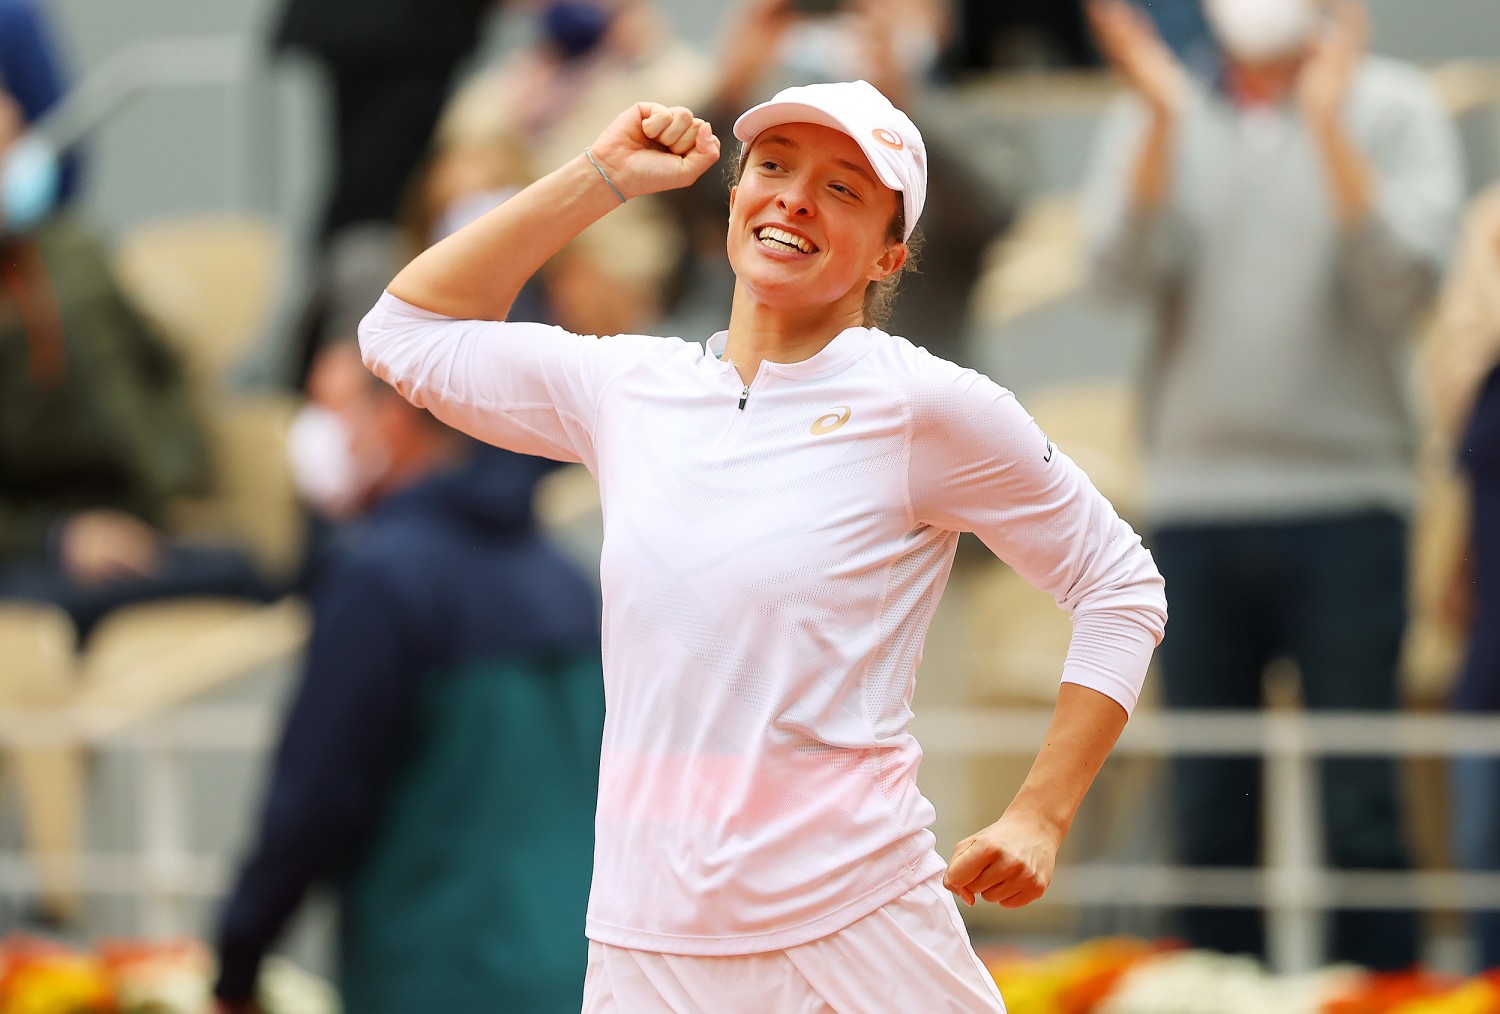 Three months out of high school, Polish player Iga Swiatek wins French Open